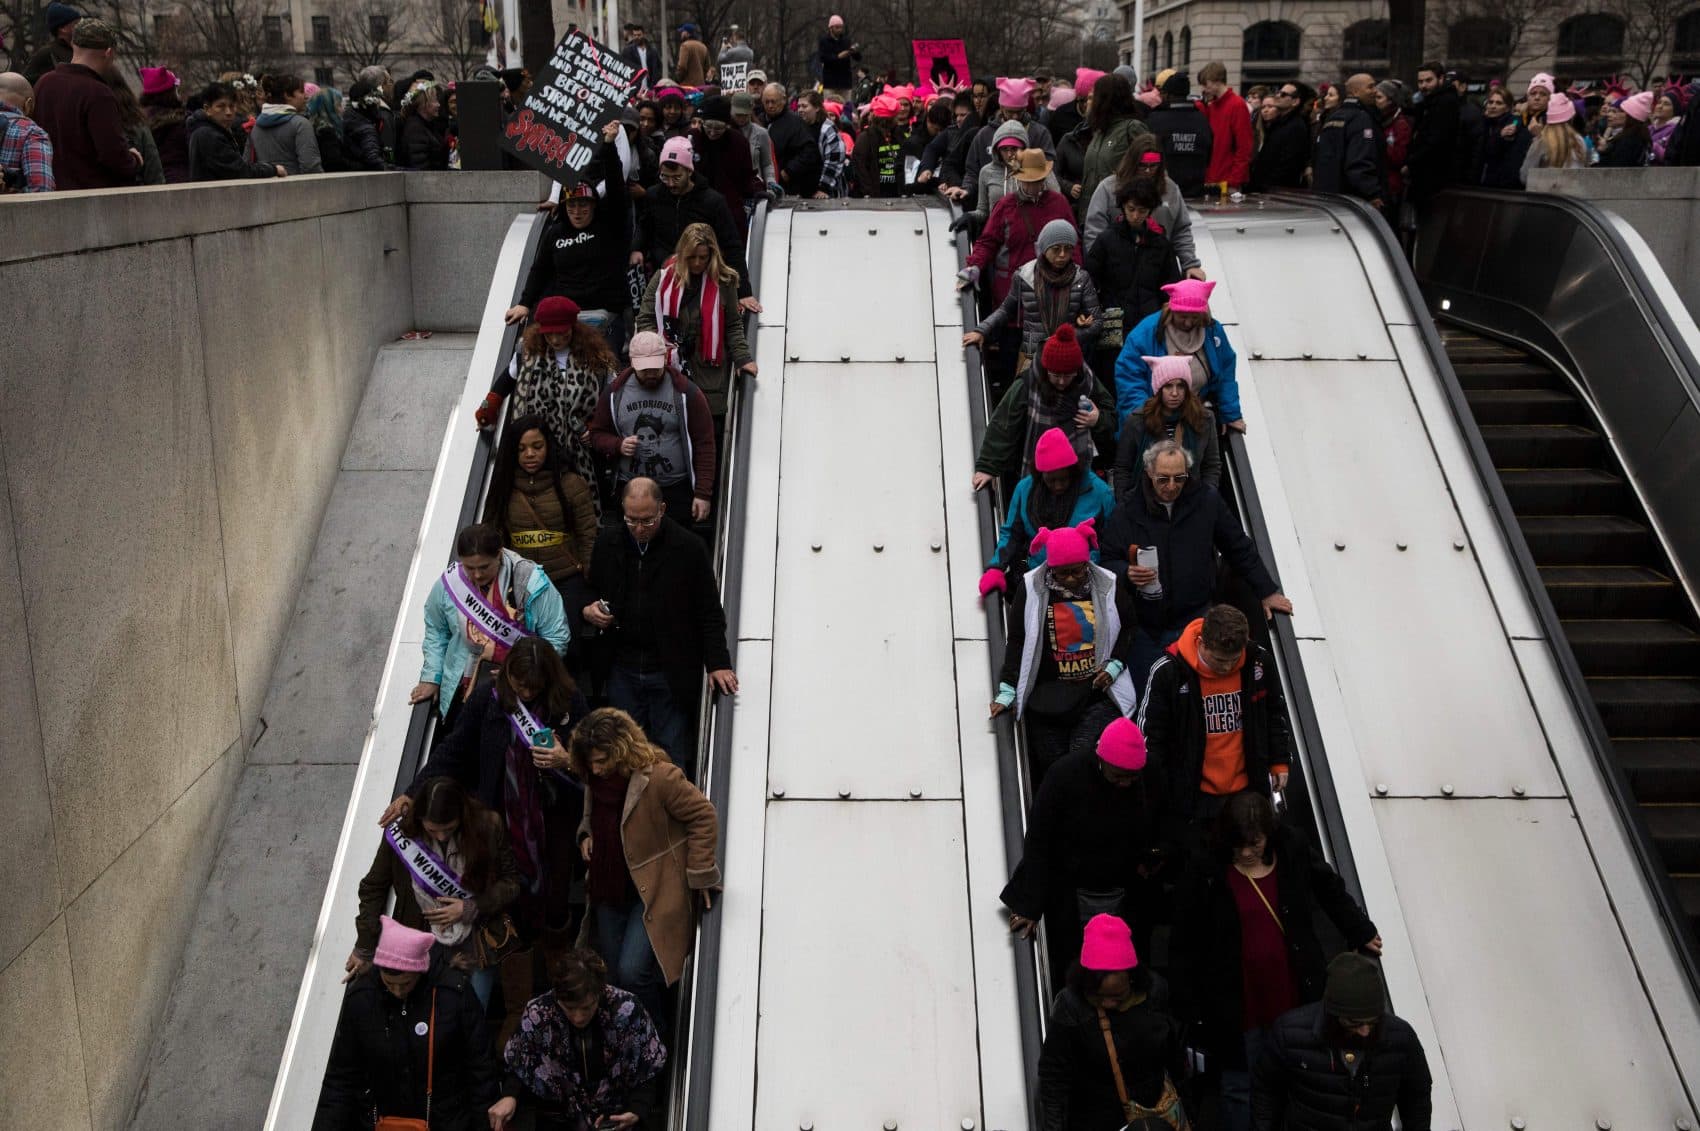 People make their way onto the National Archives Metro elevators during the Women's March on Washington Jan. 21, 2017 in Washington. (Zach Gibson/AFP/Getty Images)